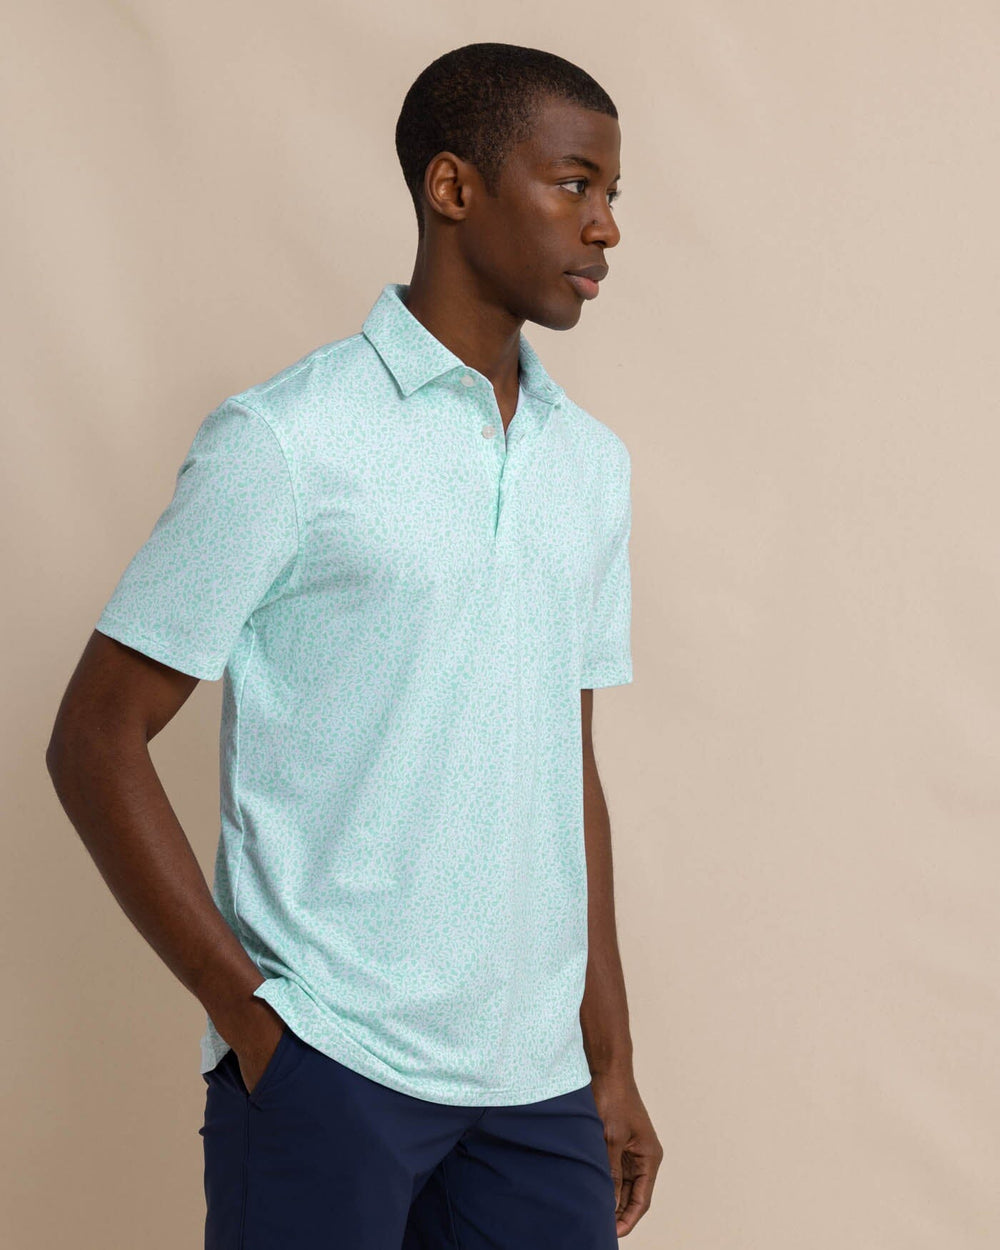 The front view of the Southern Tide Driver That Floral Feeling Printed Polo by Southern Tide - Wake Blue